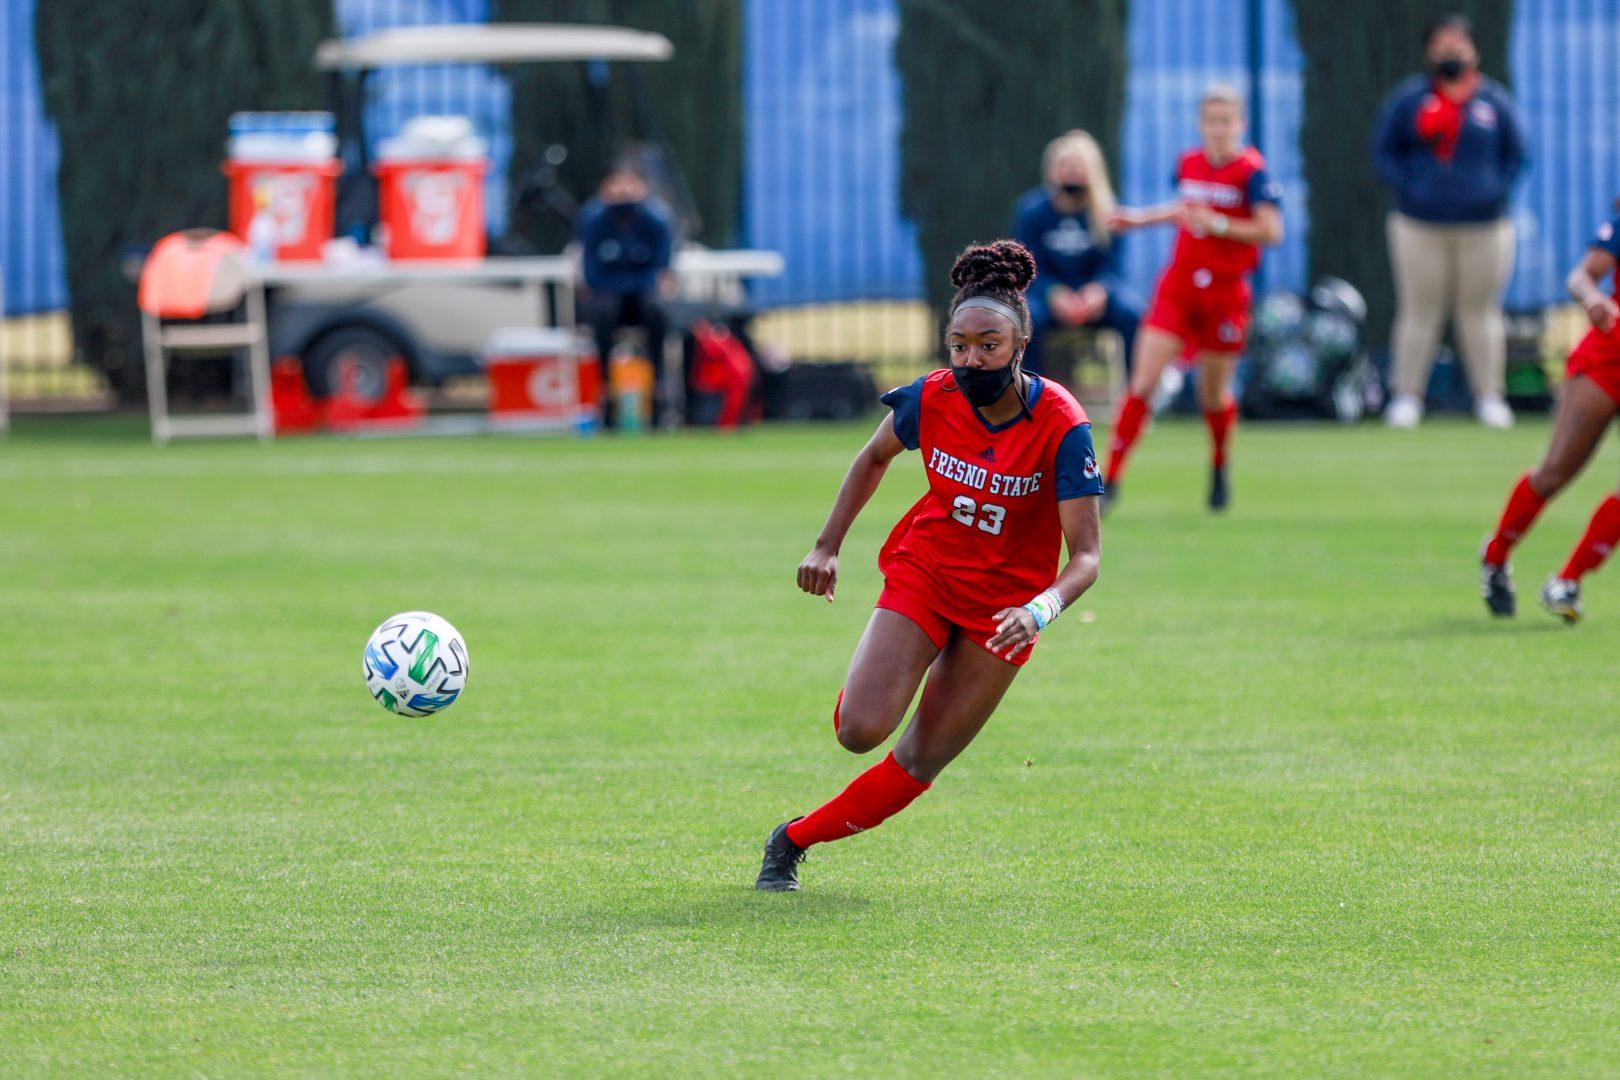 Fresno State forward Jordan Brown chases the ball during the first half of the game against SDSU at the Soccer and Lacrosse Stadium on Sunday, March 14, 2021. (Vendila Yang/The Collegian)